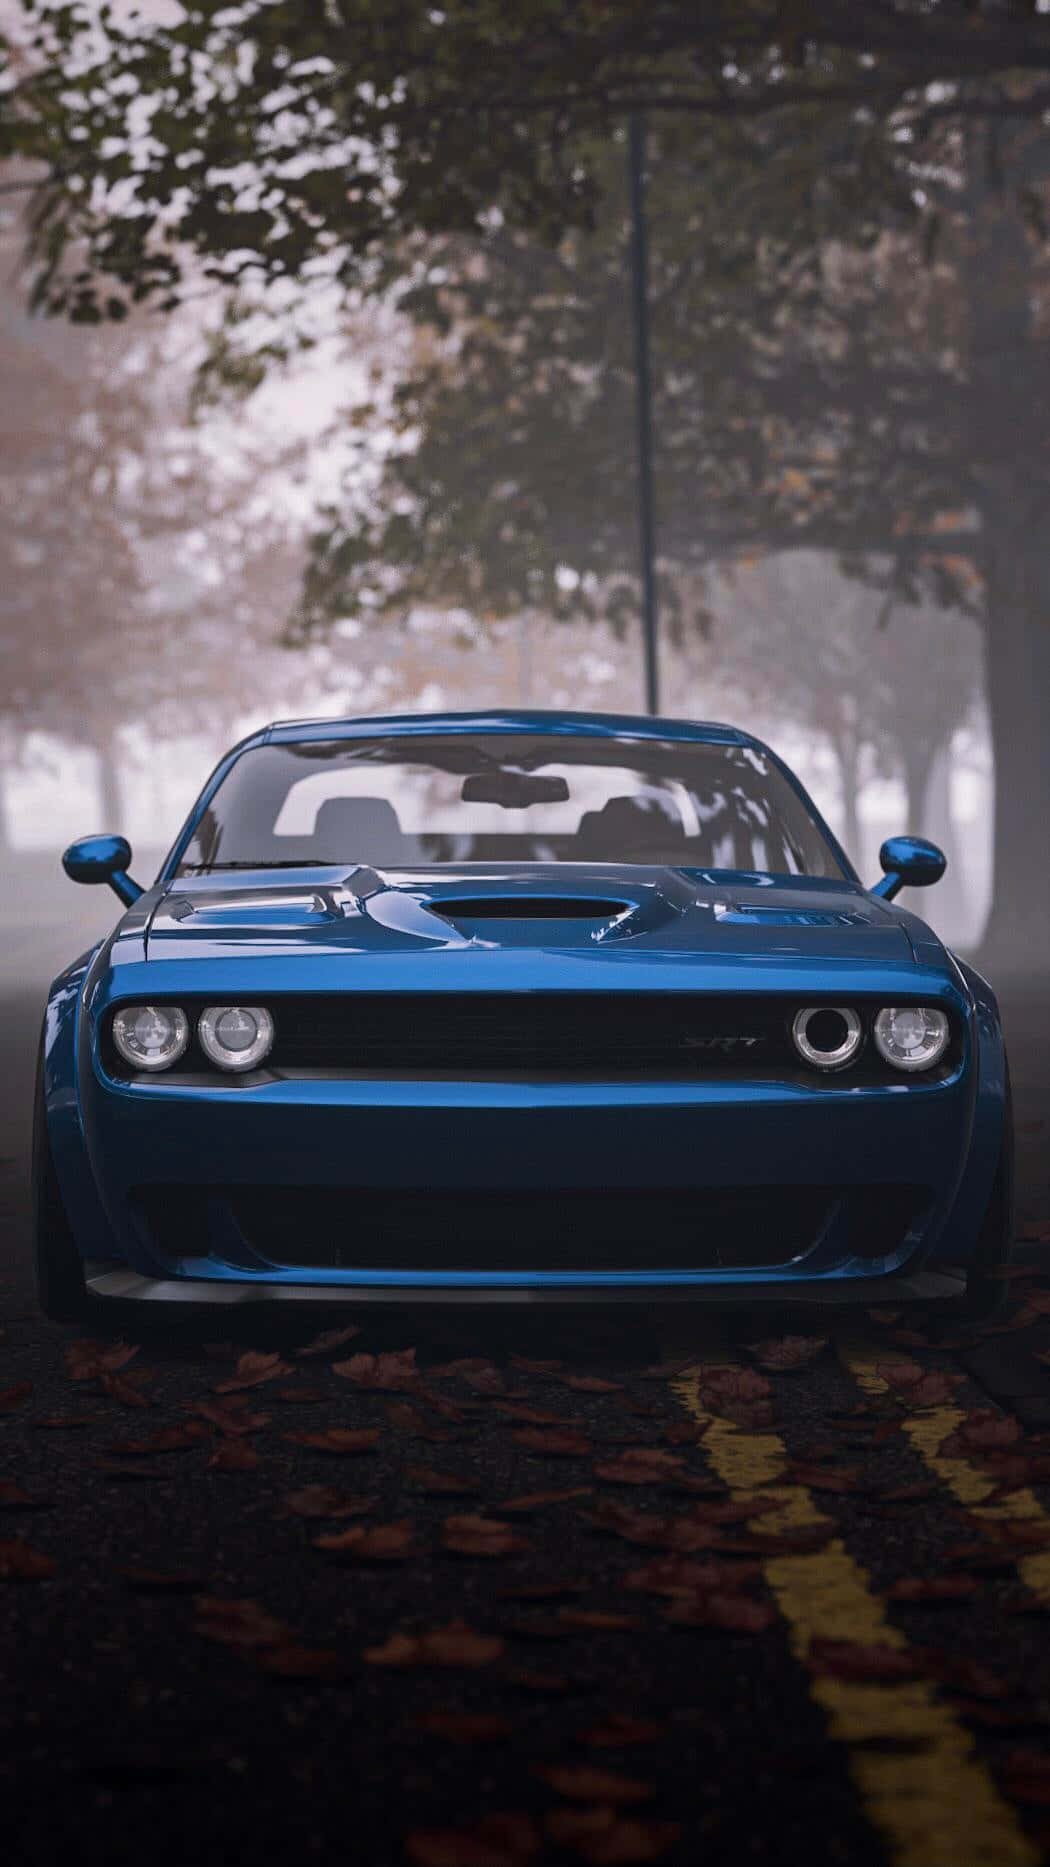 Get the ultimate iPhone experience with the Hellcat Wallpaper